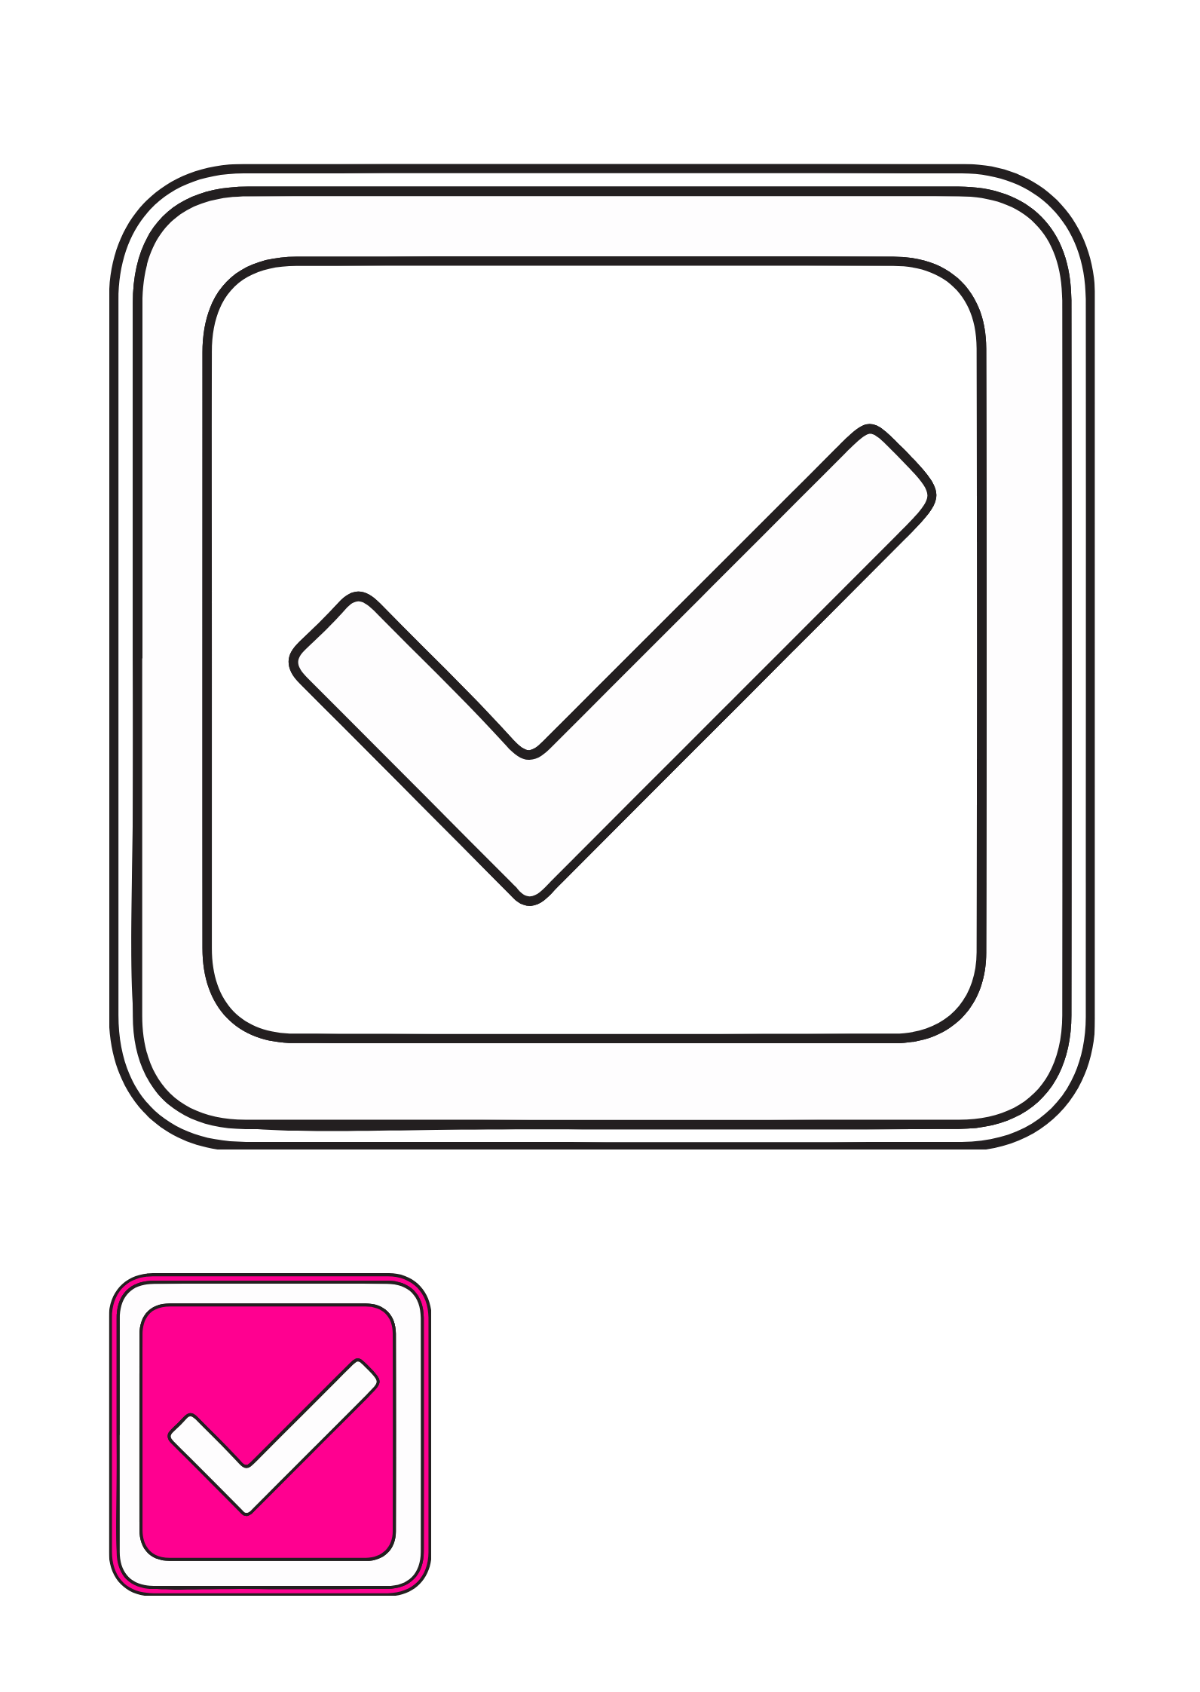 Pink Check/Tick Mark Coloring Page Template